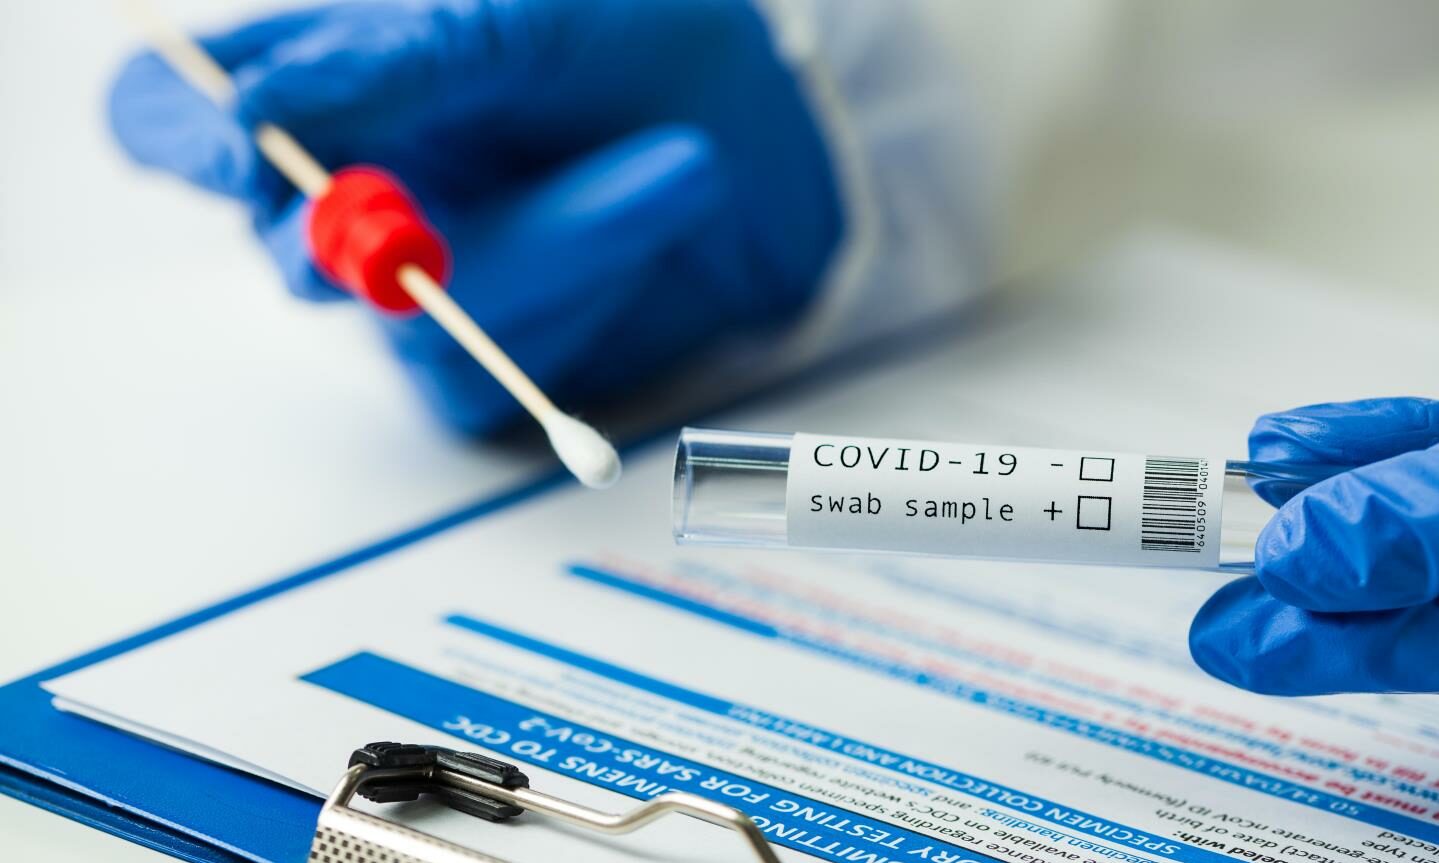 A Covid swab is inserted into a test tube